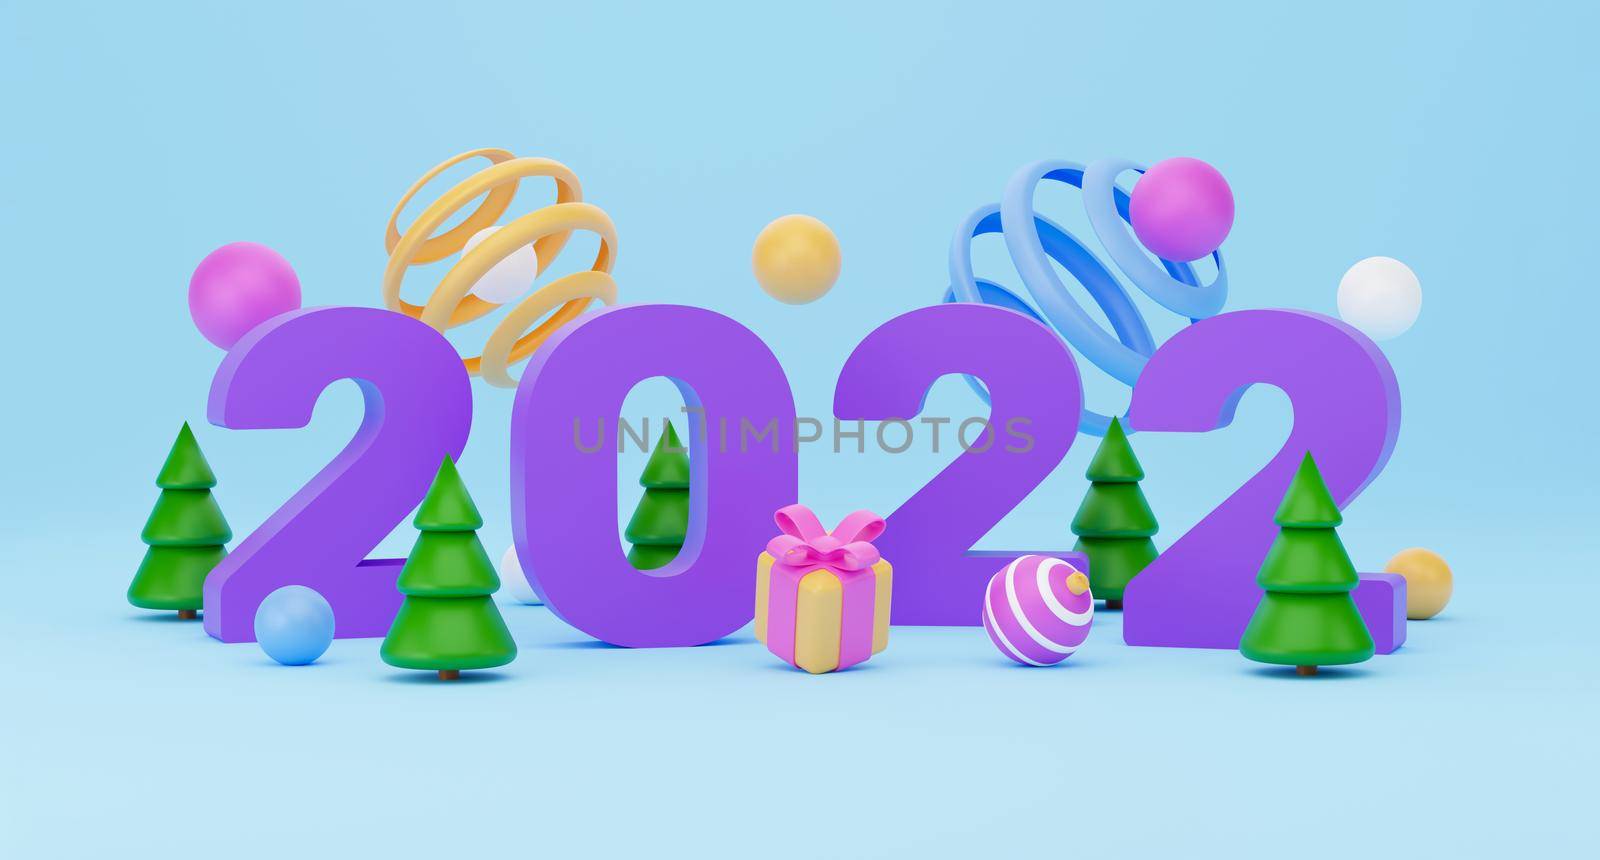 2022 new year banner. 3d render, abstract colorful geometric background, multicolored balls, balloons, primitive shapes, minimalistic design. Merry christmas and happy new year greeting card